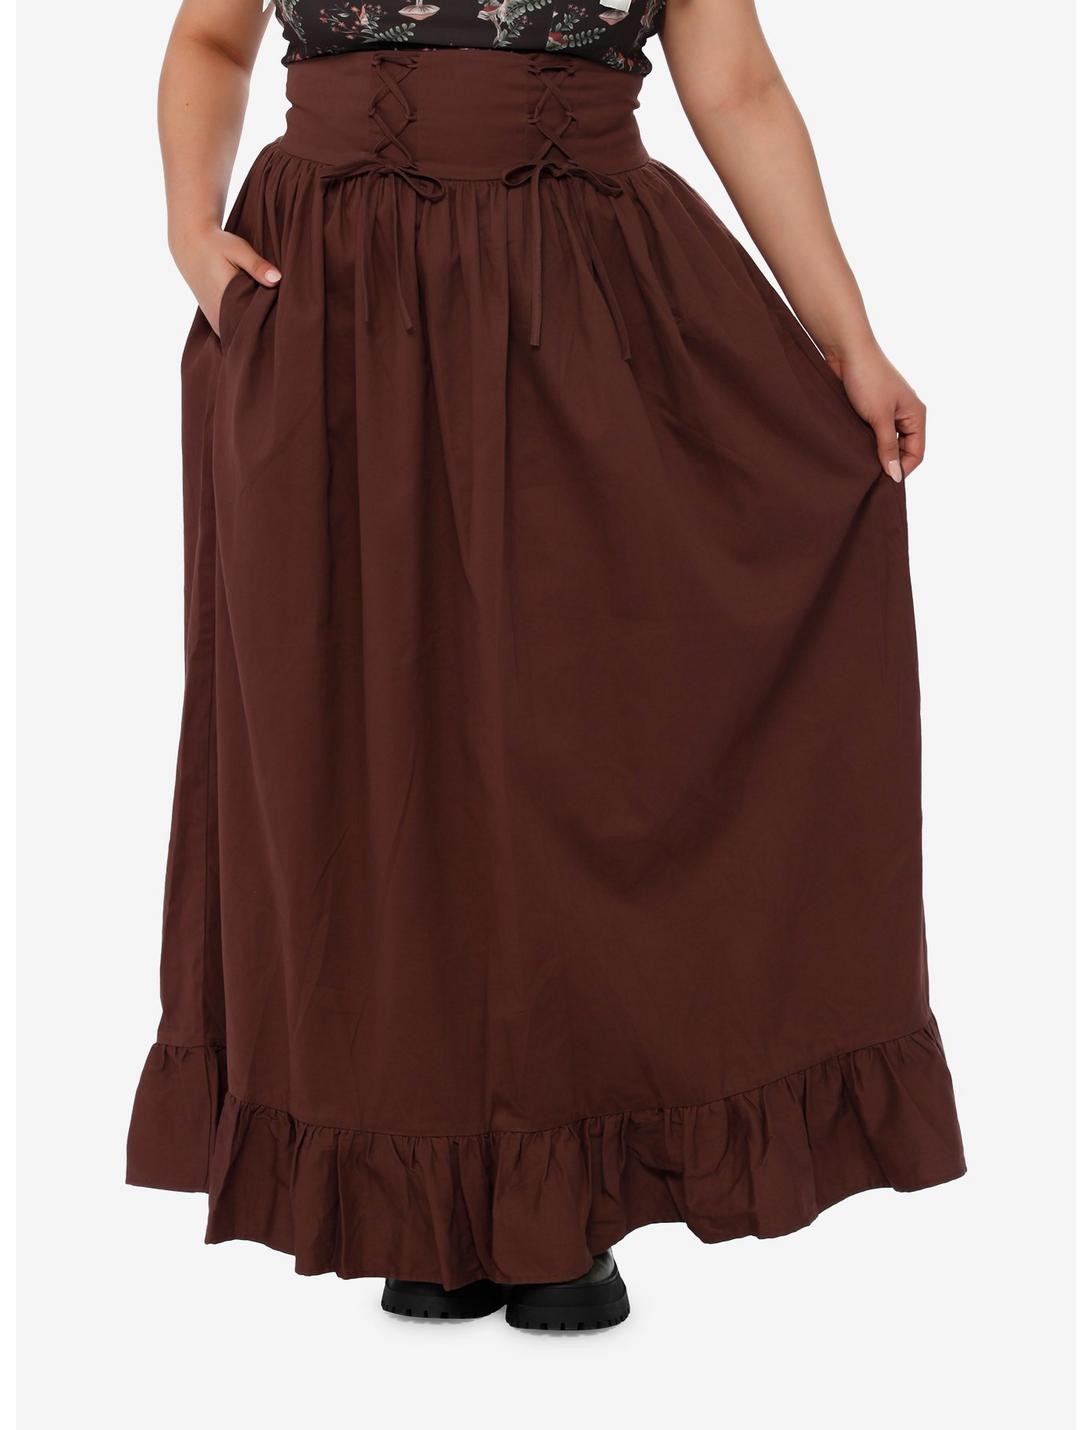 Thorn & Fable Brown Lace-Up Maxi Skirt Plus Size, BROWN, hi-res